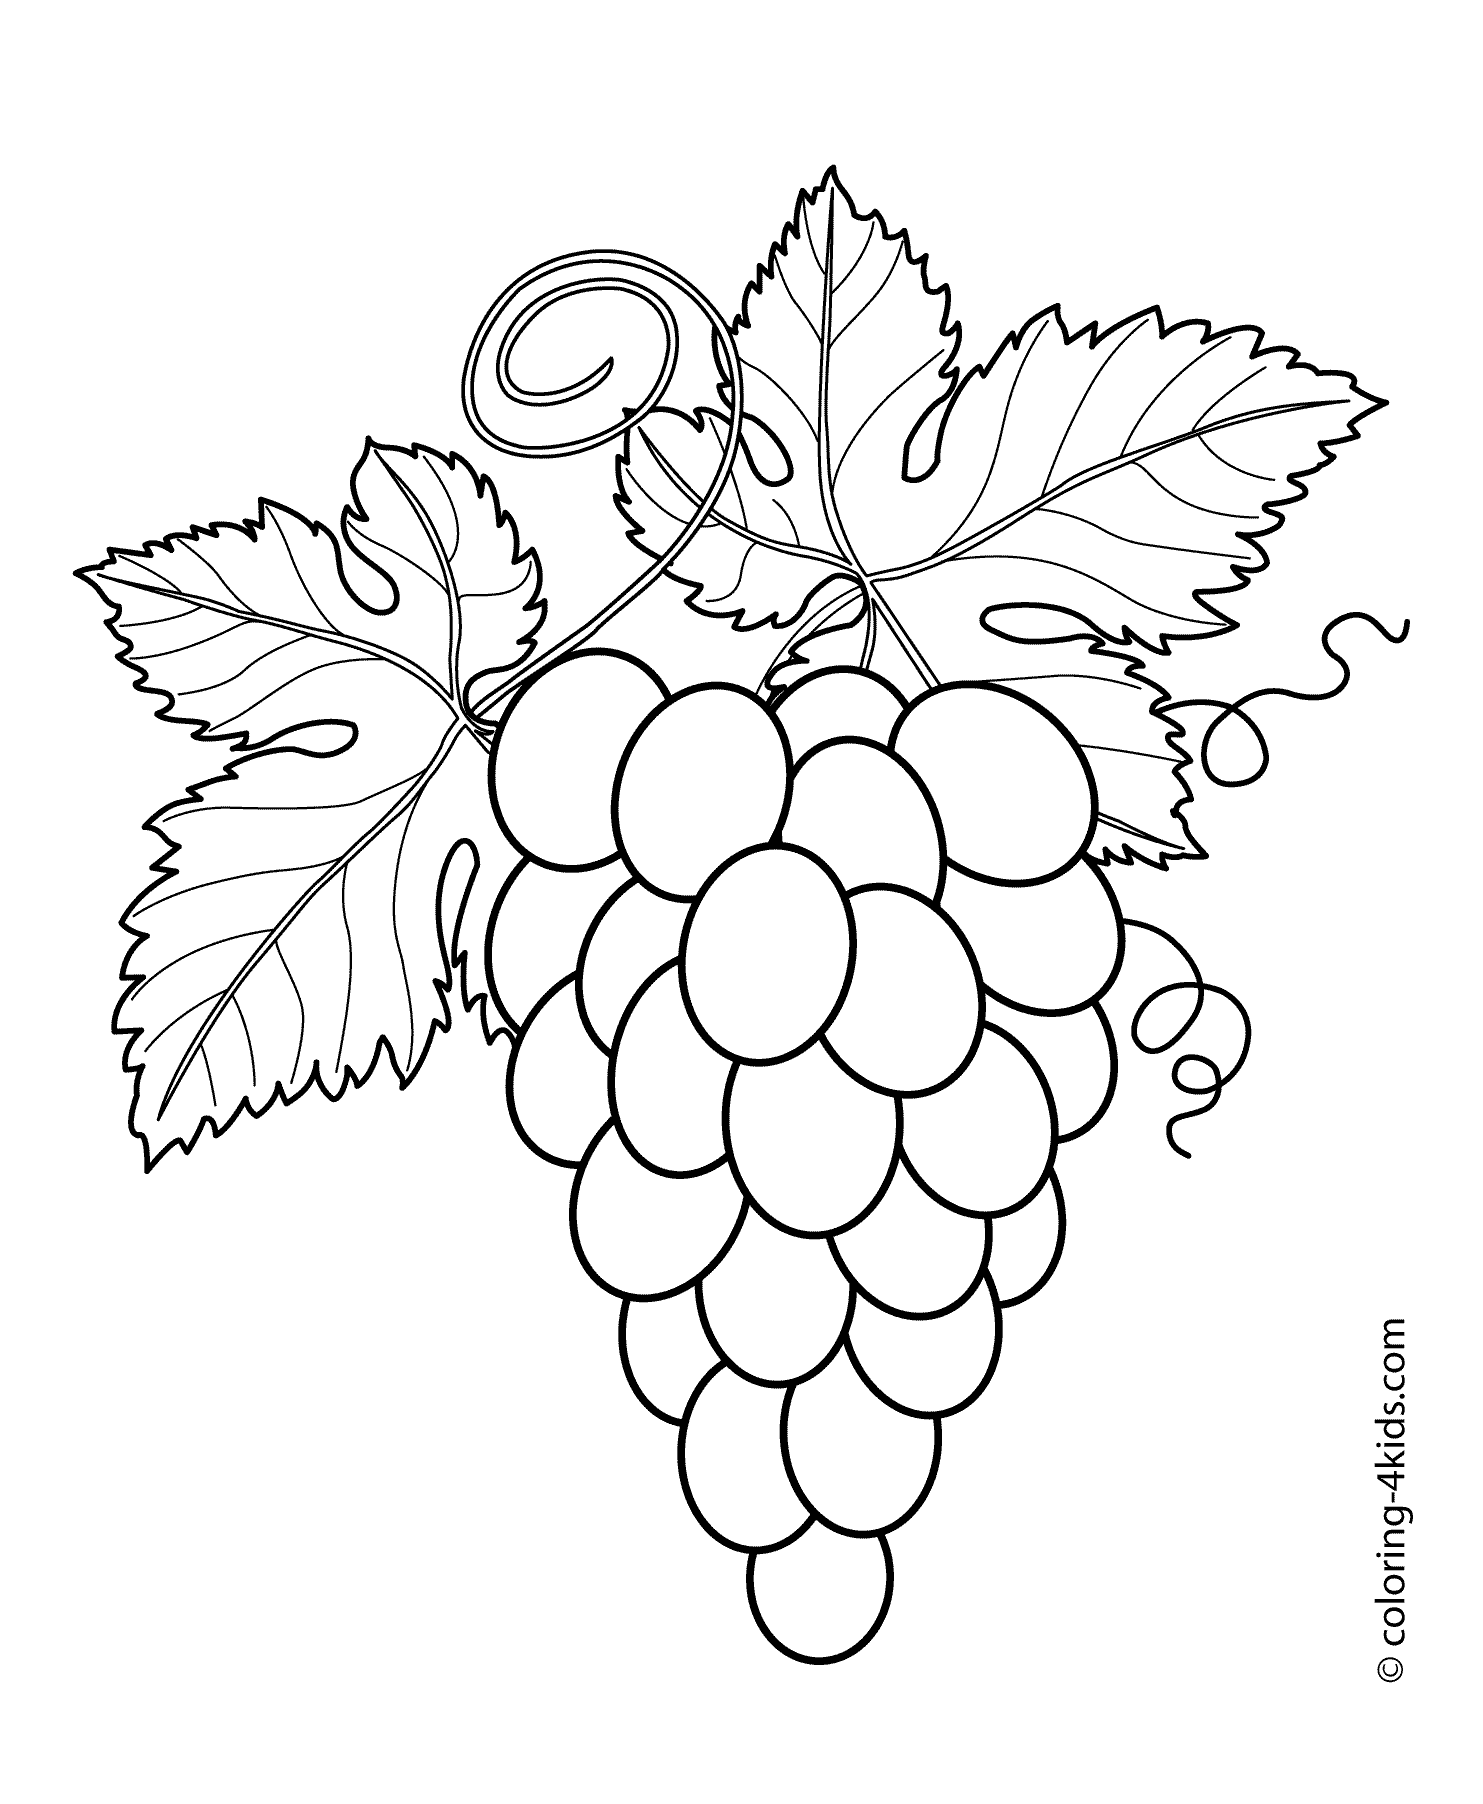 Bunch of grapes hand drawn sketch icon Royalty Free Vector